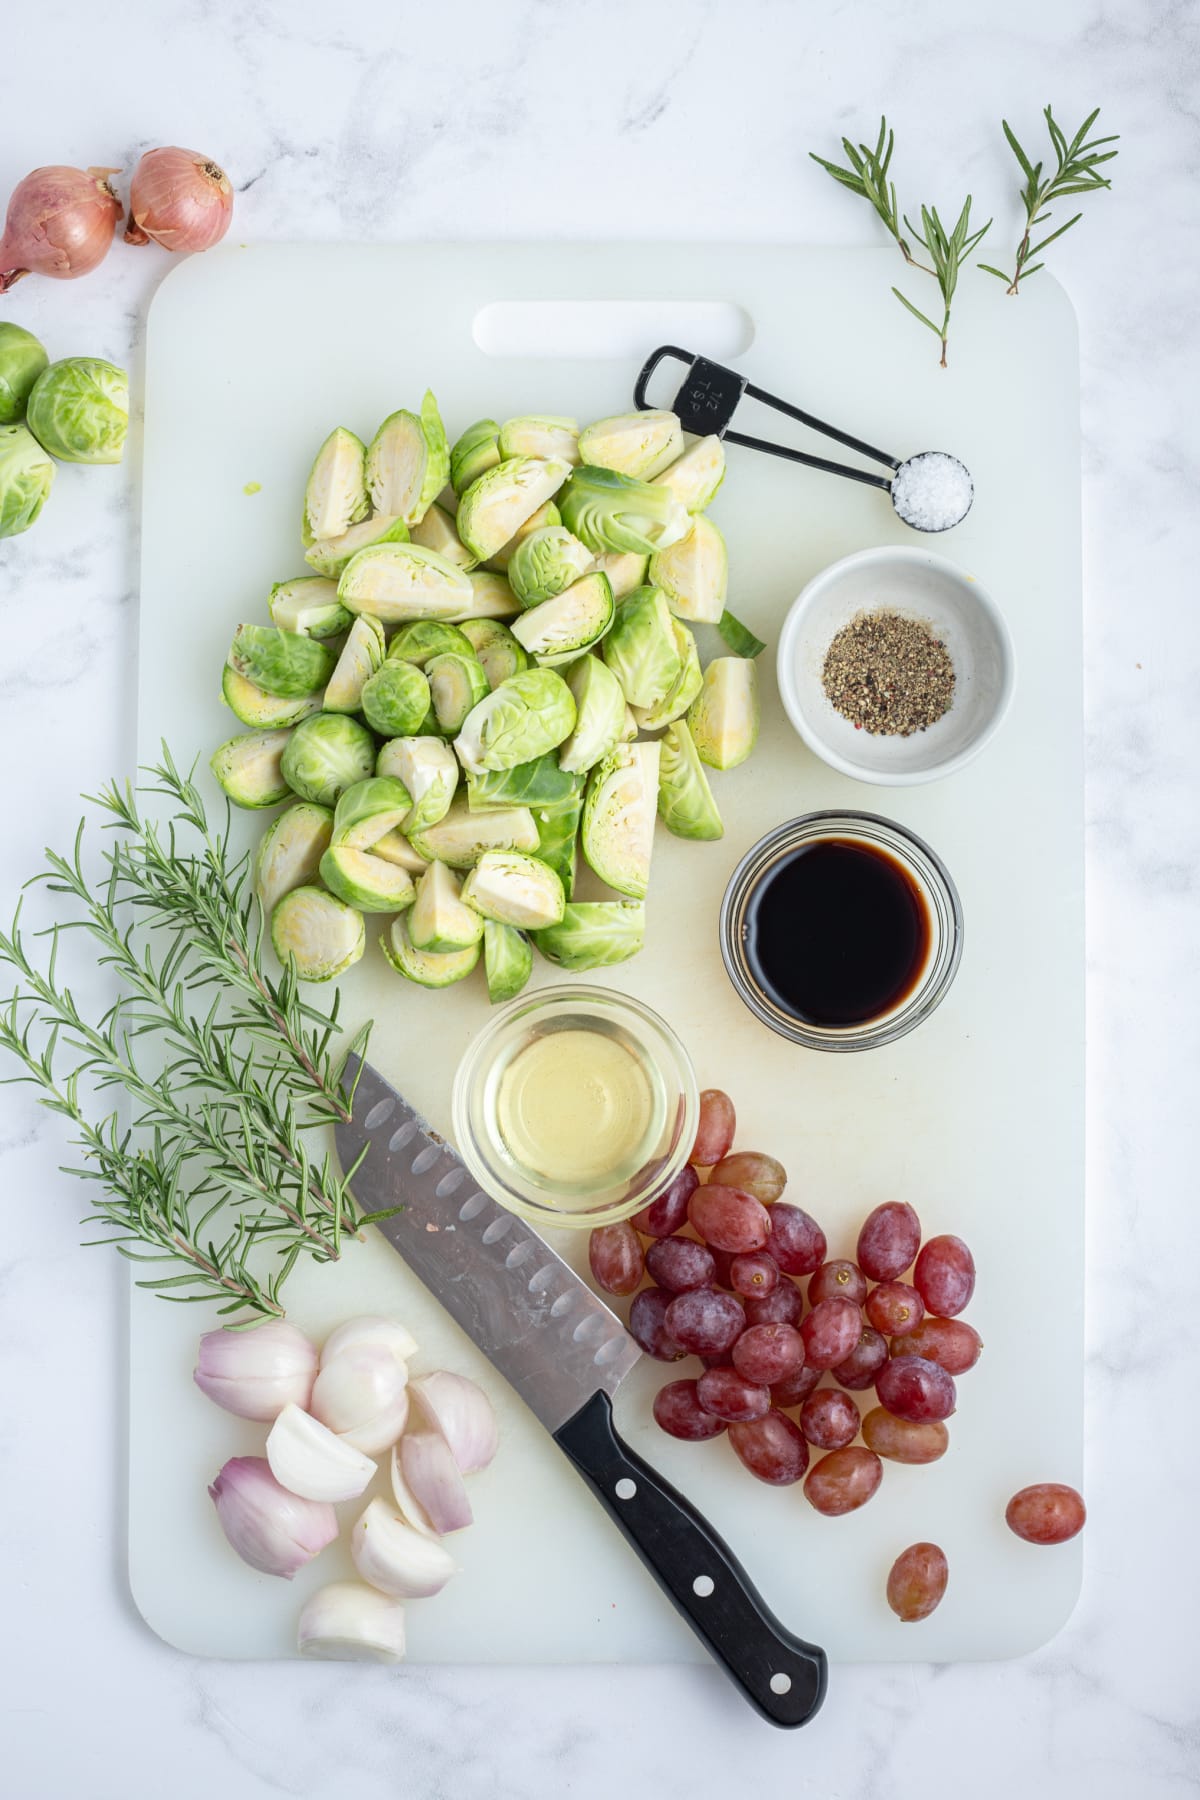 ingredients displayed for making sheet pan balsamic brussels sprouts